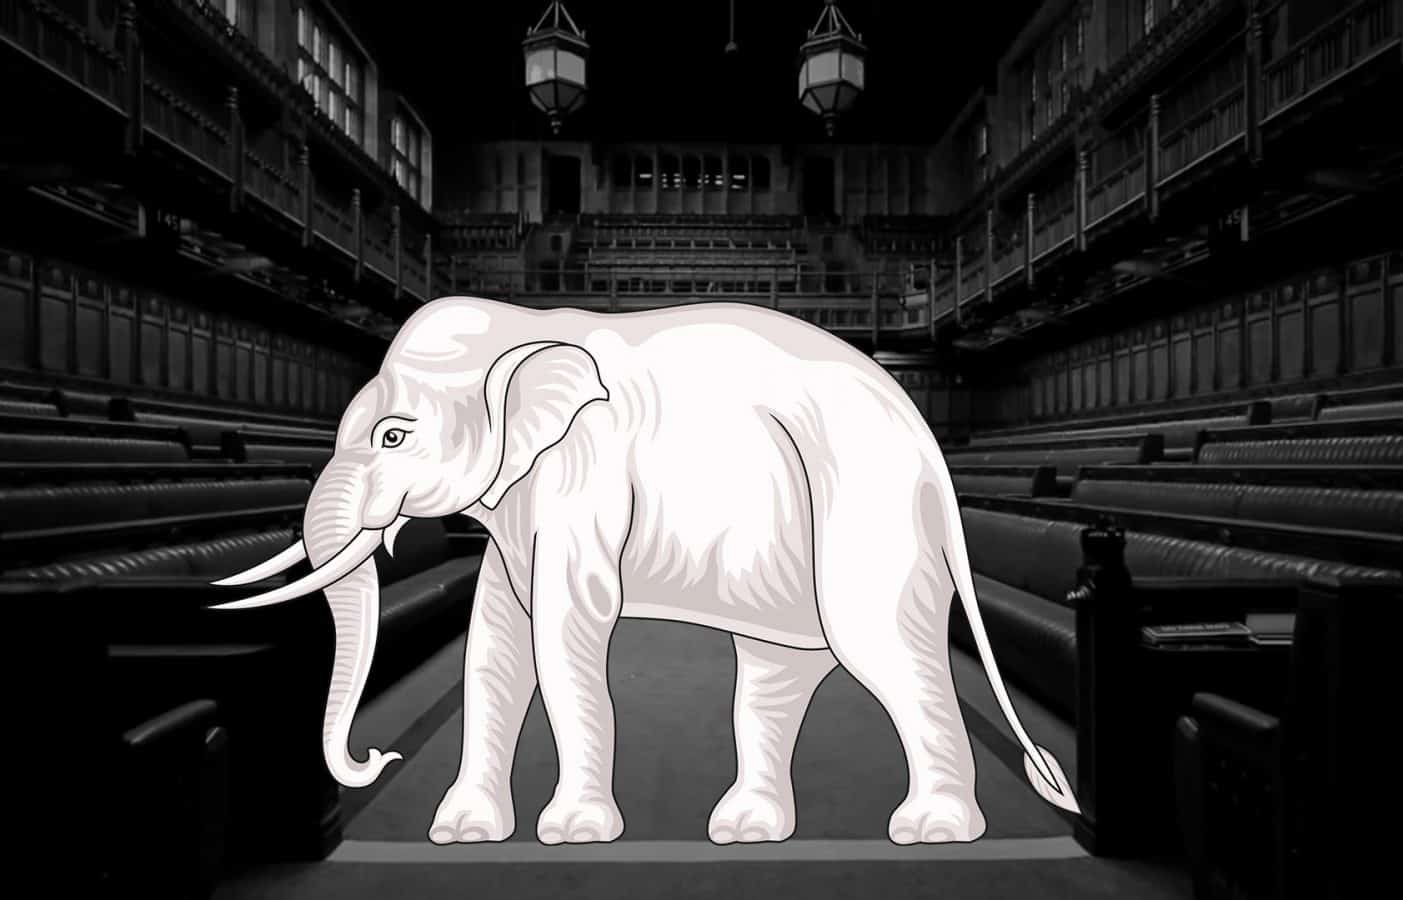 It S Time For May To Face Up To The White Elephant In The Room